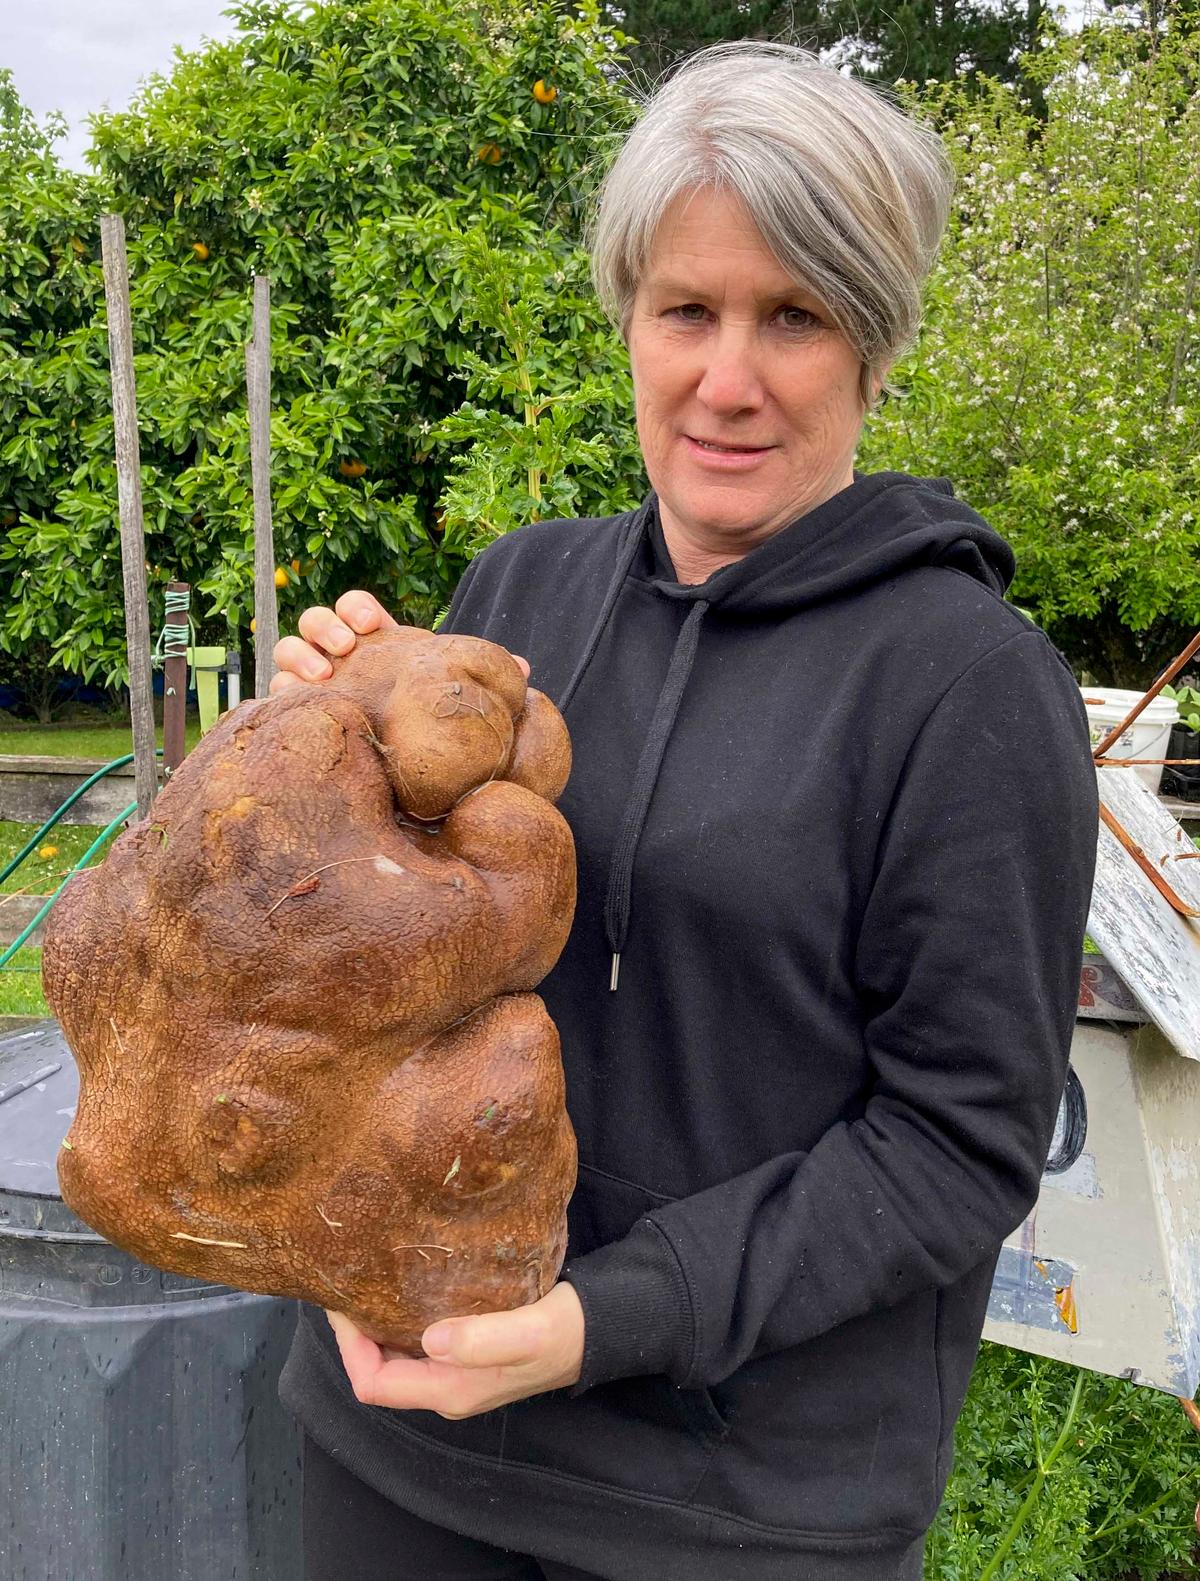 Donna Craig-Brown holds a large potato dug from her garden at her home near Hamilton, New Zealand, Wednesday, Nov. 3. (Colin Craig-Brown via AP)